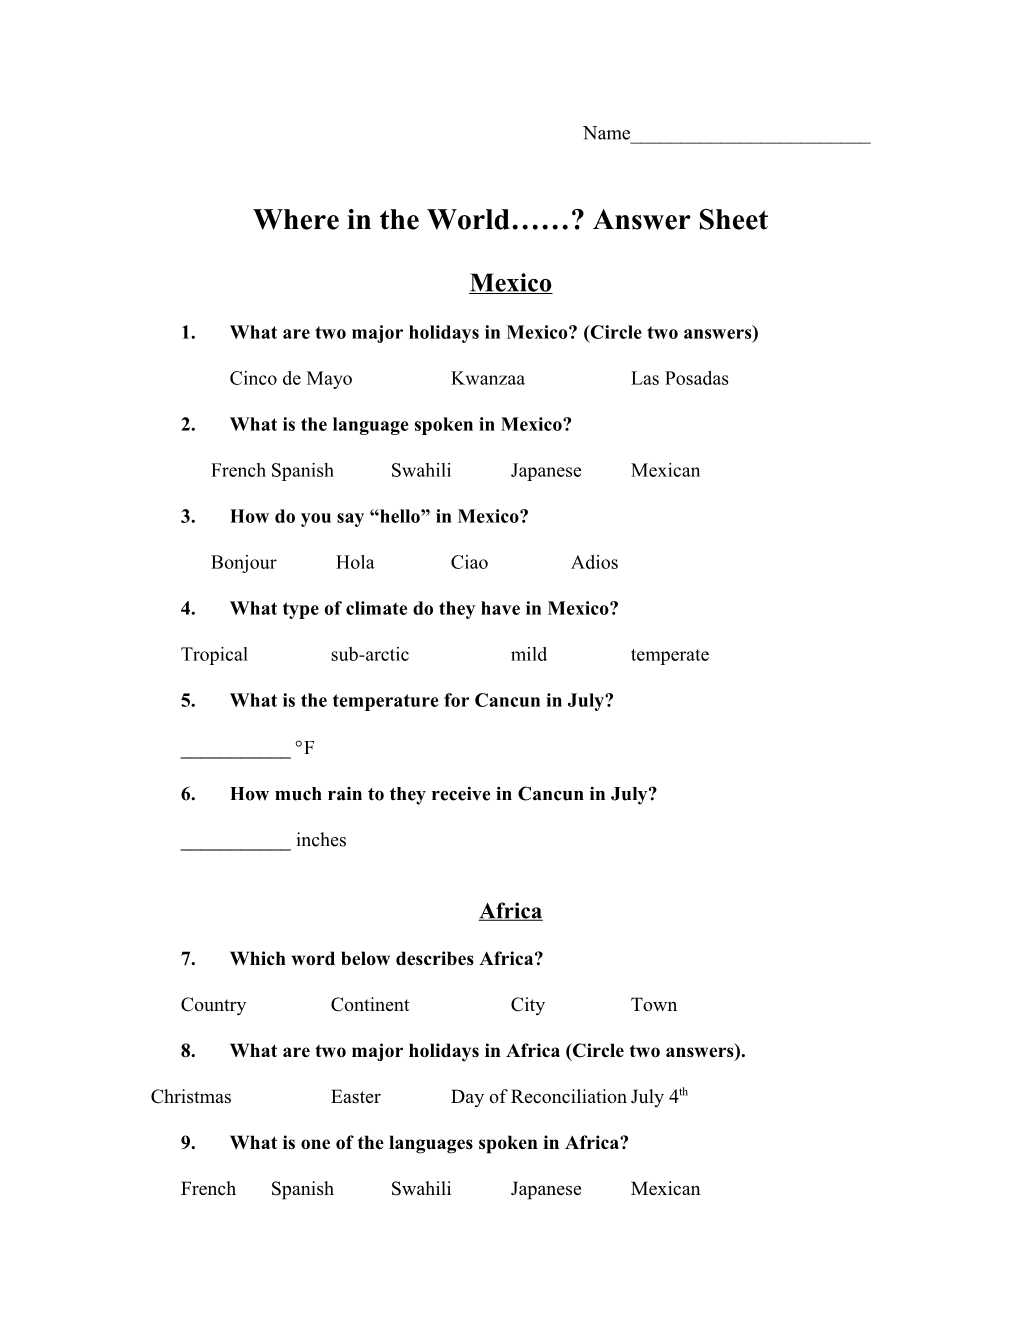 Where in the World ? Answer Sheet